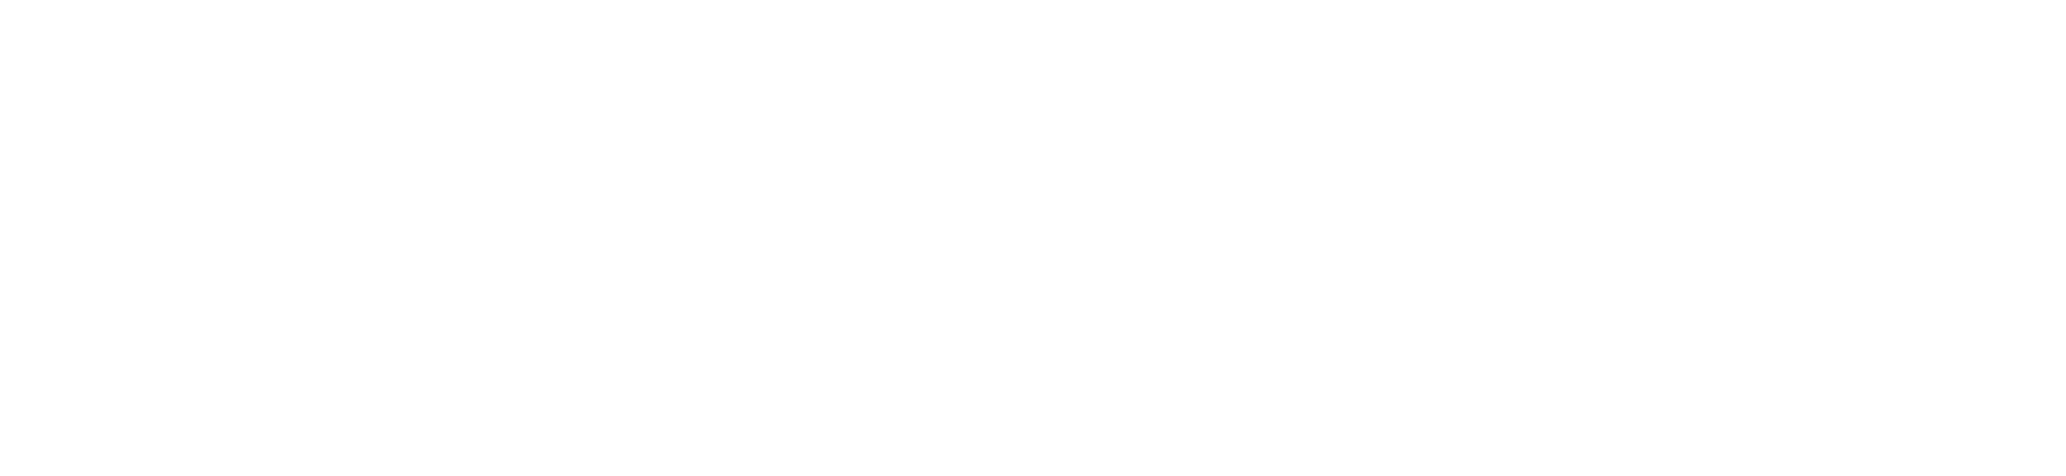 Smart Contract Research Forum